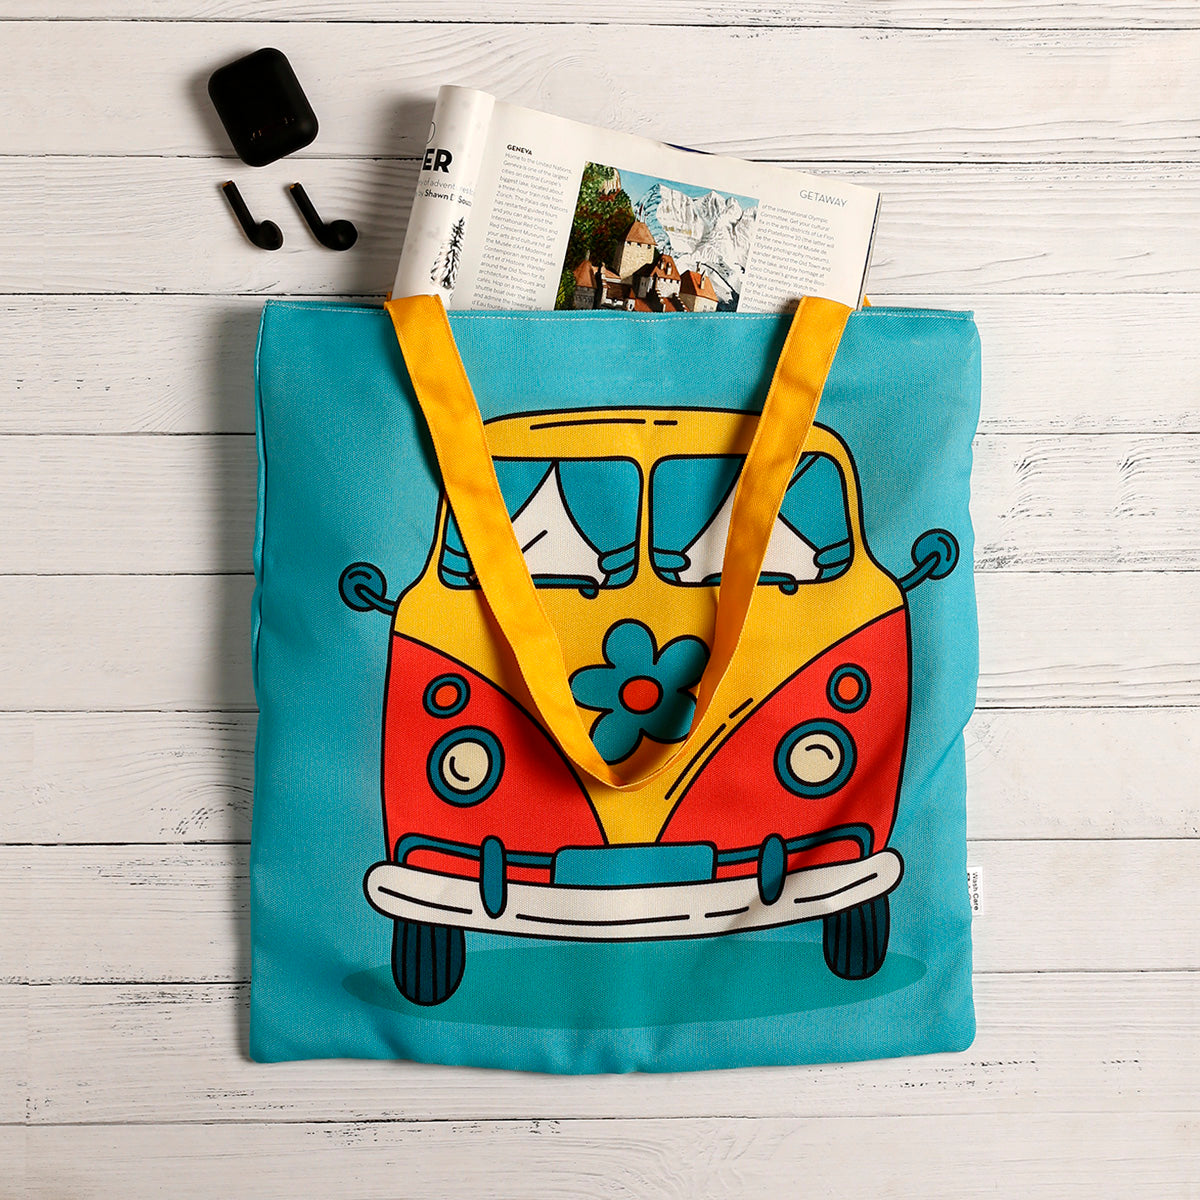 Colorful tote bag with cartoon van design, perfect for carrying your essentials in style.